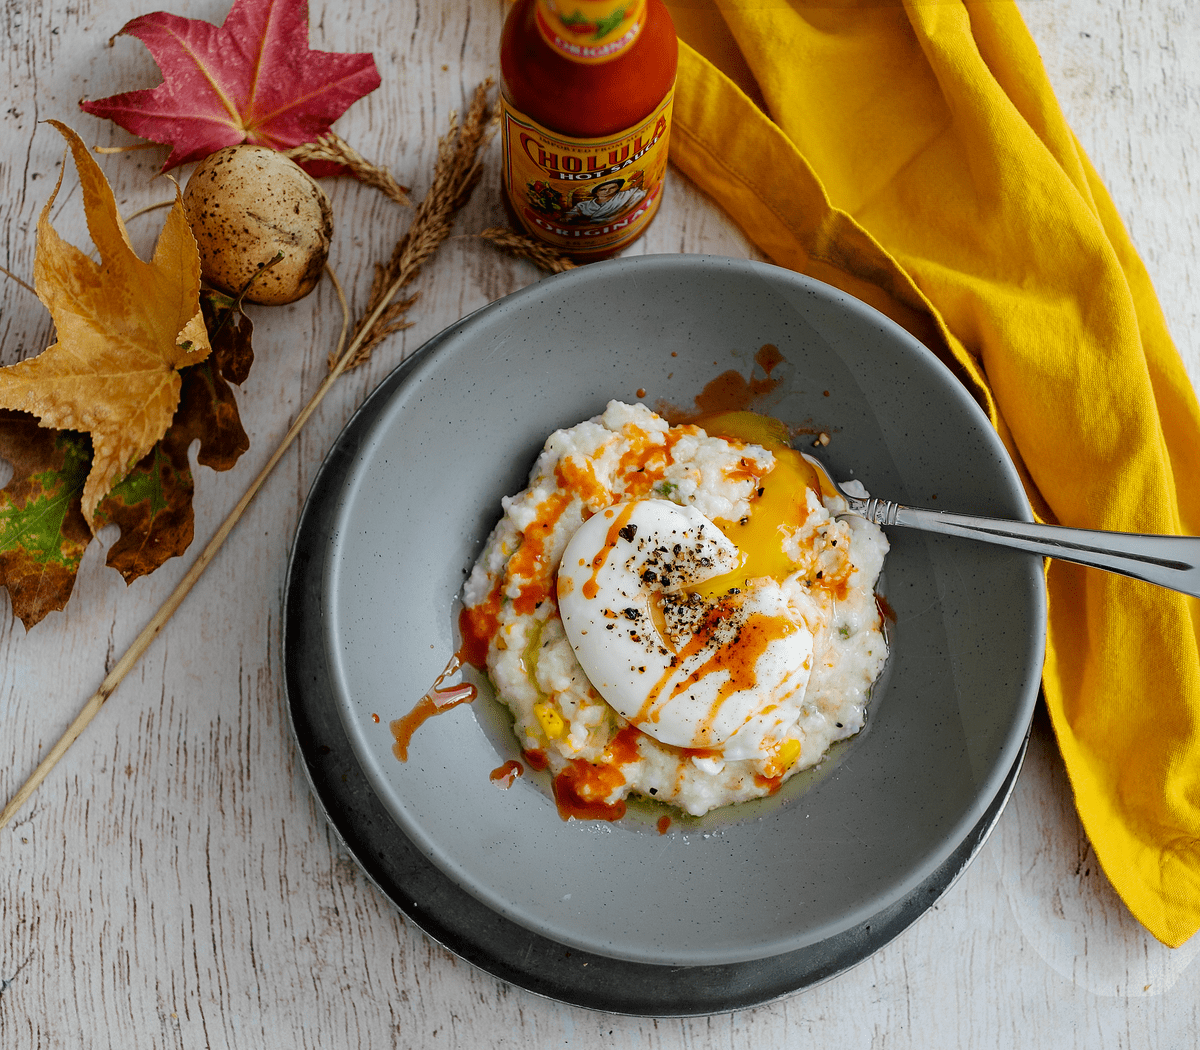 Bowl of grits with poached egg and hot sauce